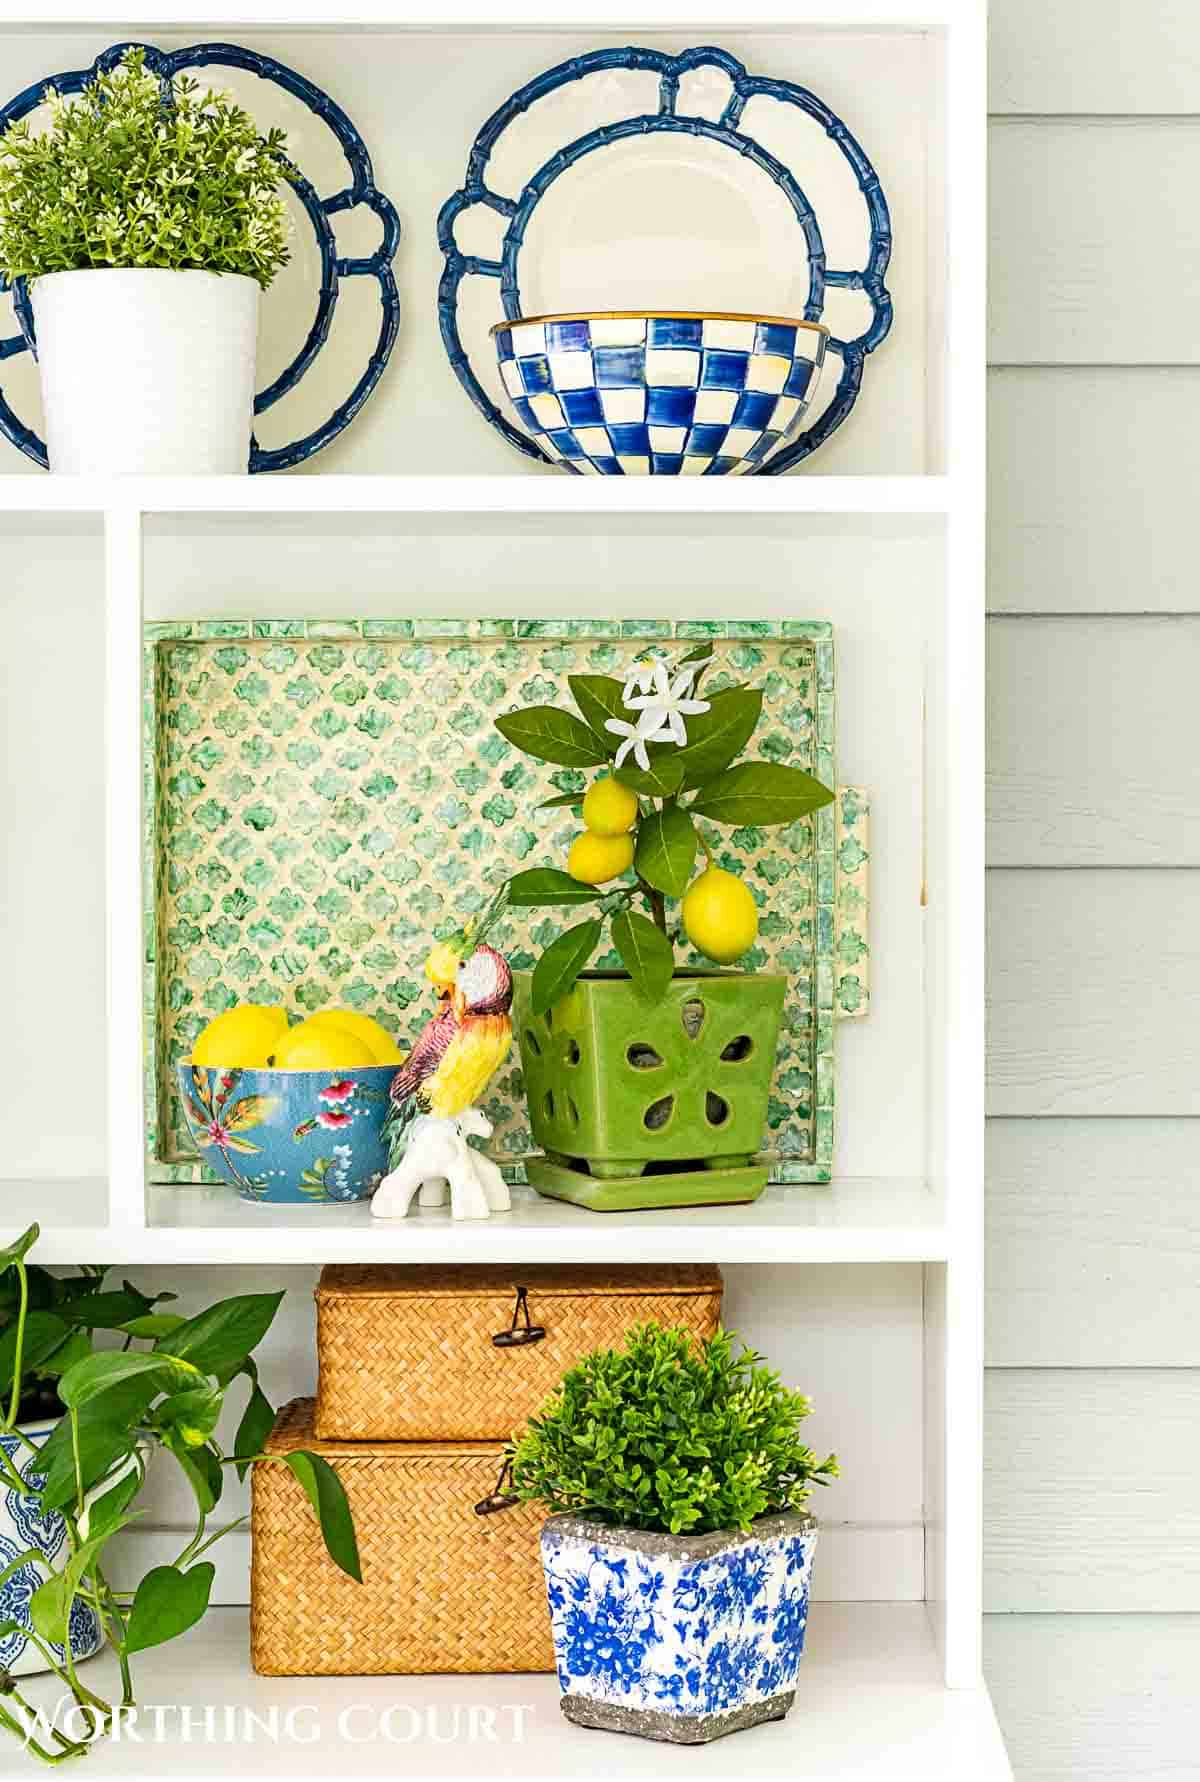 https://www.worthingcourtblog.com/wp-content/uploads/2023/05/blue-and-green-porch-decorating-ideas-for-summer-1.jpg